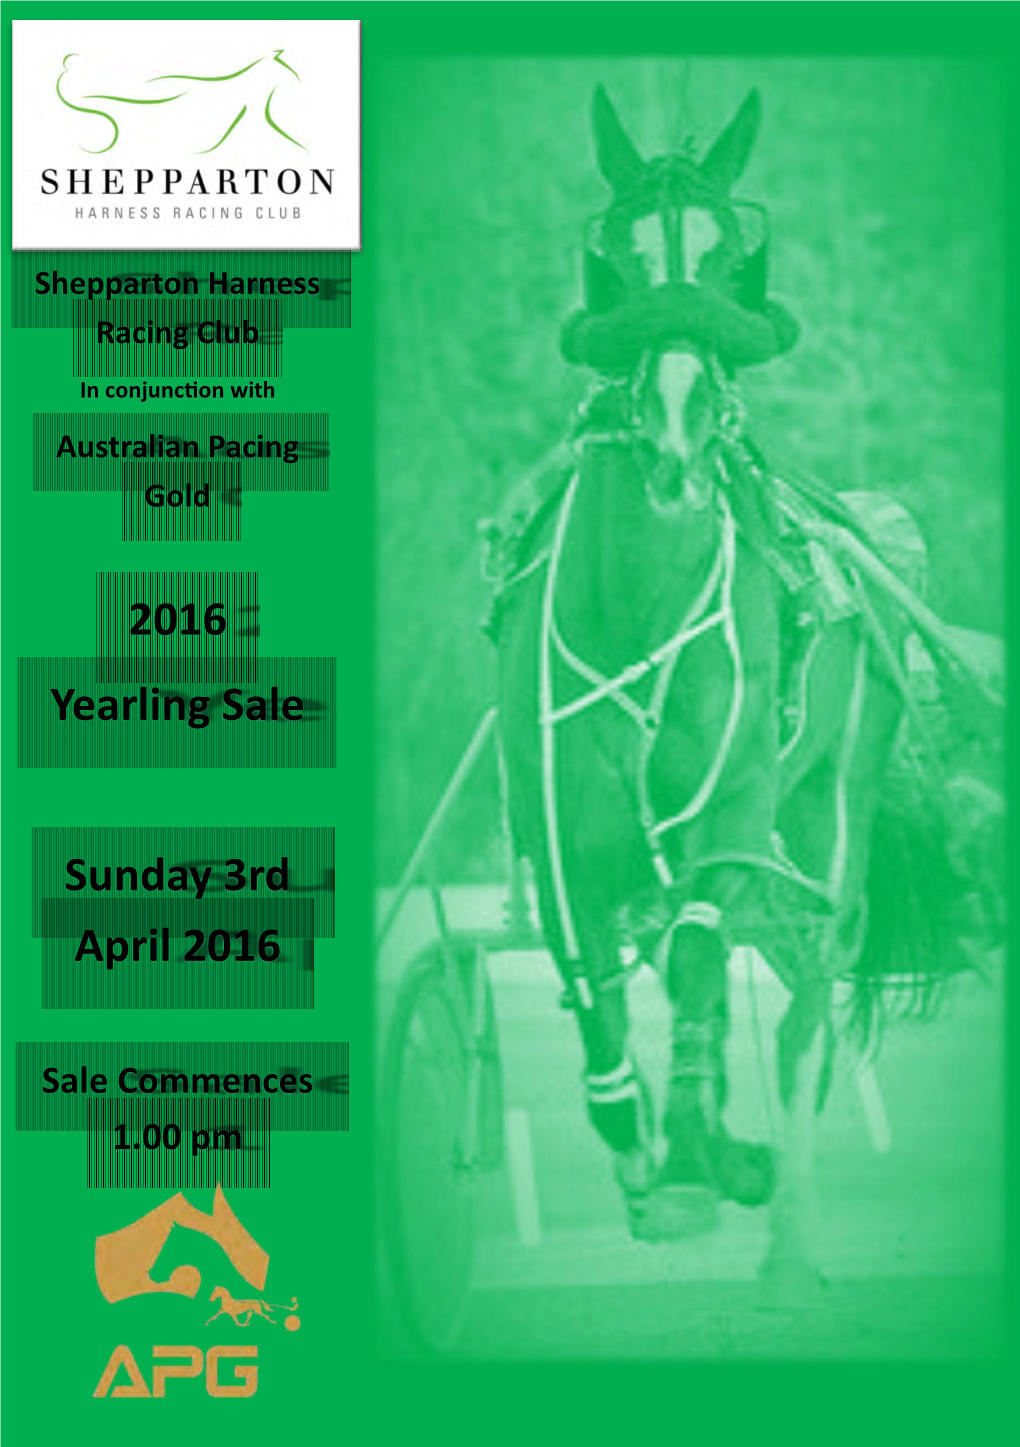 2016 YEARLING SALE SUNDAY 3RD APRIL 2016 Sale Commences at 1.00Pm